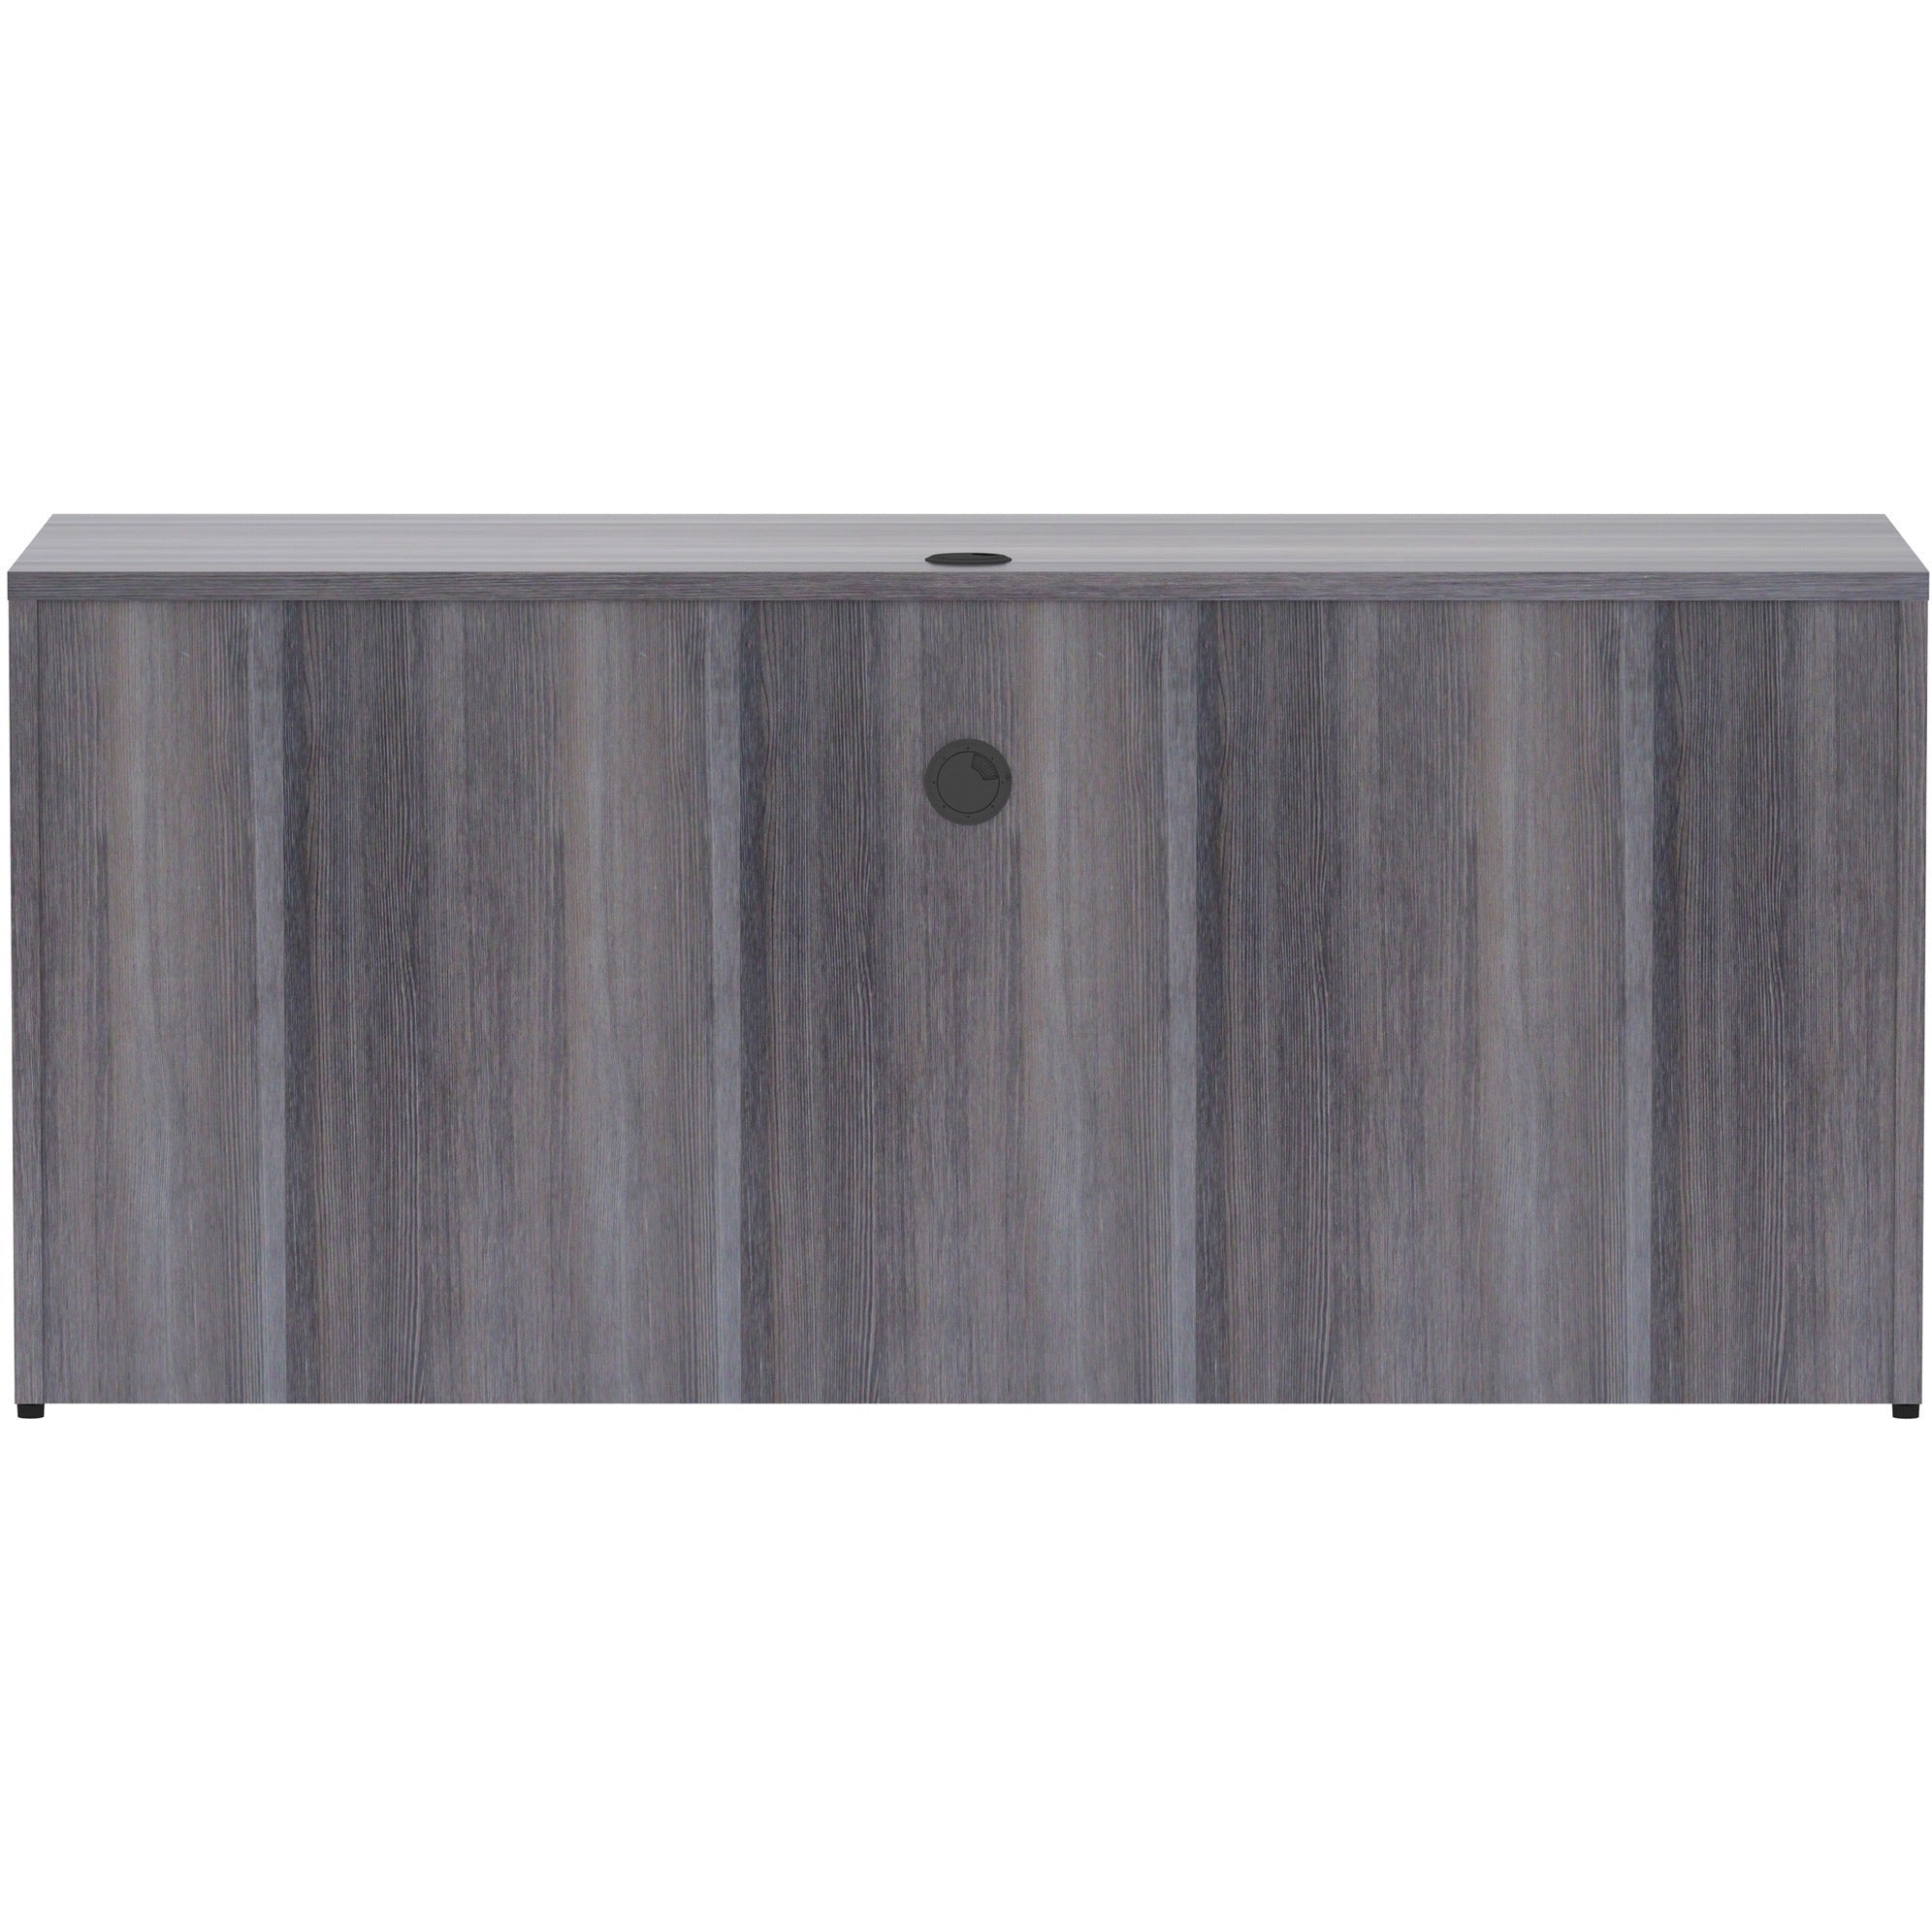 lorell-essentials-series-credenza-shell-66-x-24295-credenza-shell-1-top-finish-weathered-charcoal-laminate-silver-brush_llr69596 - 3